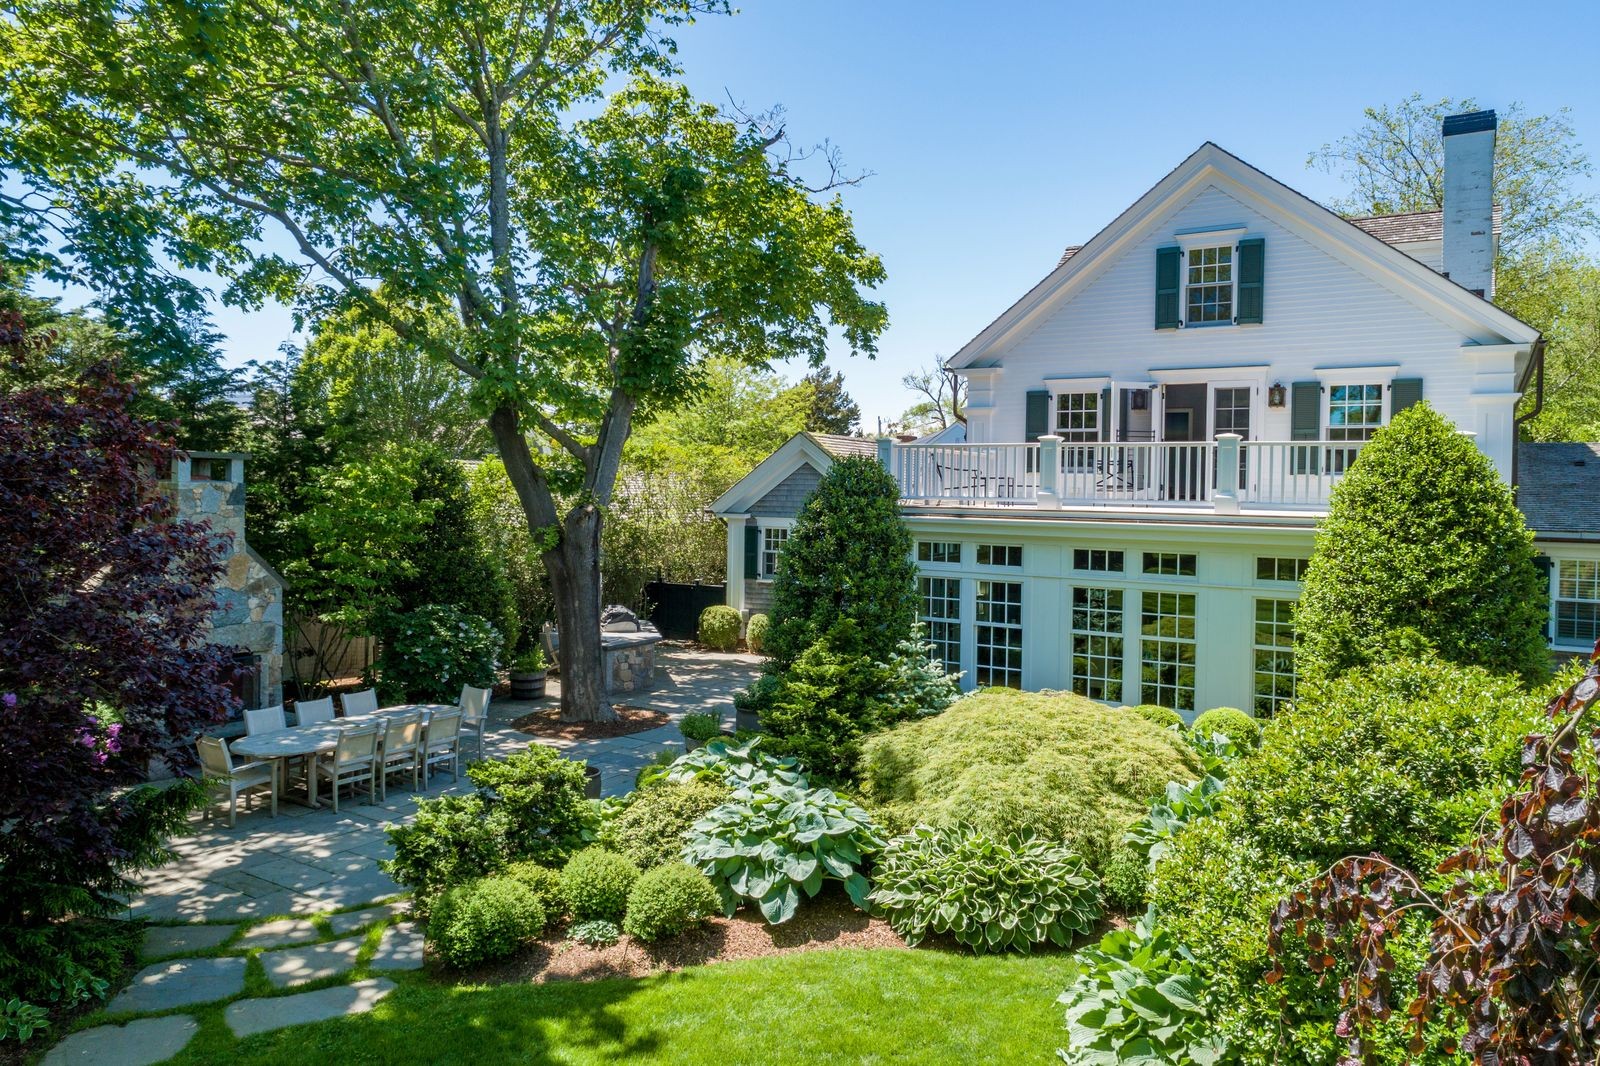 107 Peases Point Way North : a Luxury Single Family Home for Sale - Edgartown, Massachusetts